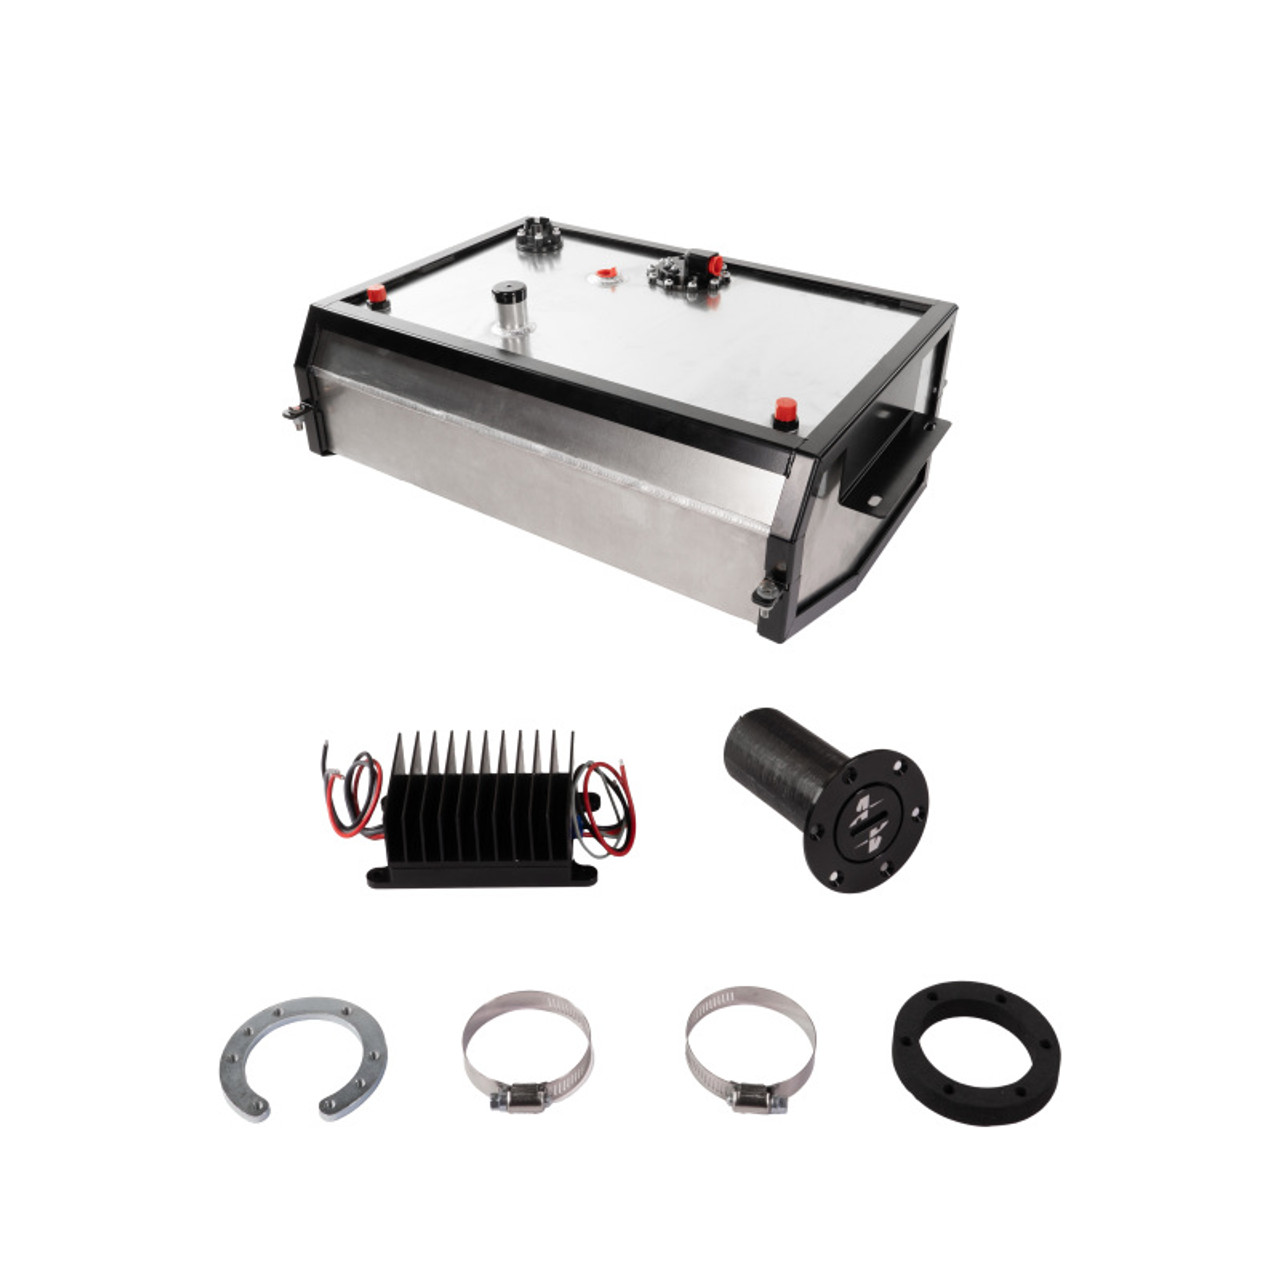 Aeromotive 67-72 Chevrolet C10 Truck Brushless TVS 3.5 GPM Rear Mount Fuel Cell - 19124 Photo - out of package